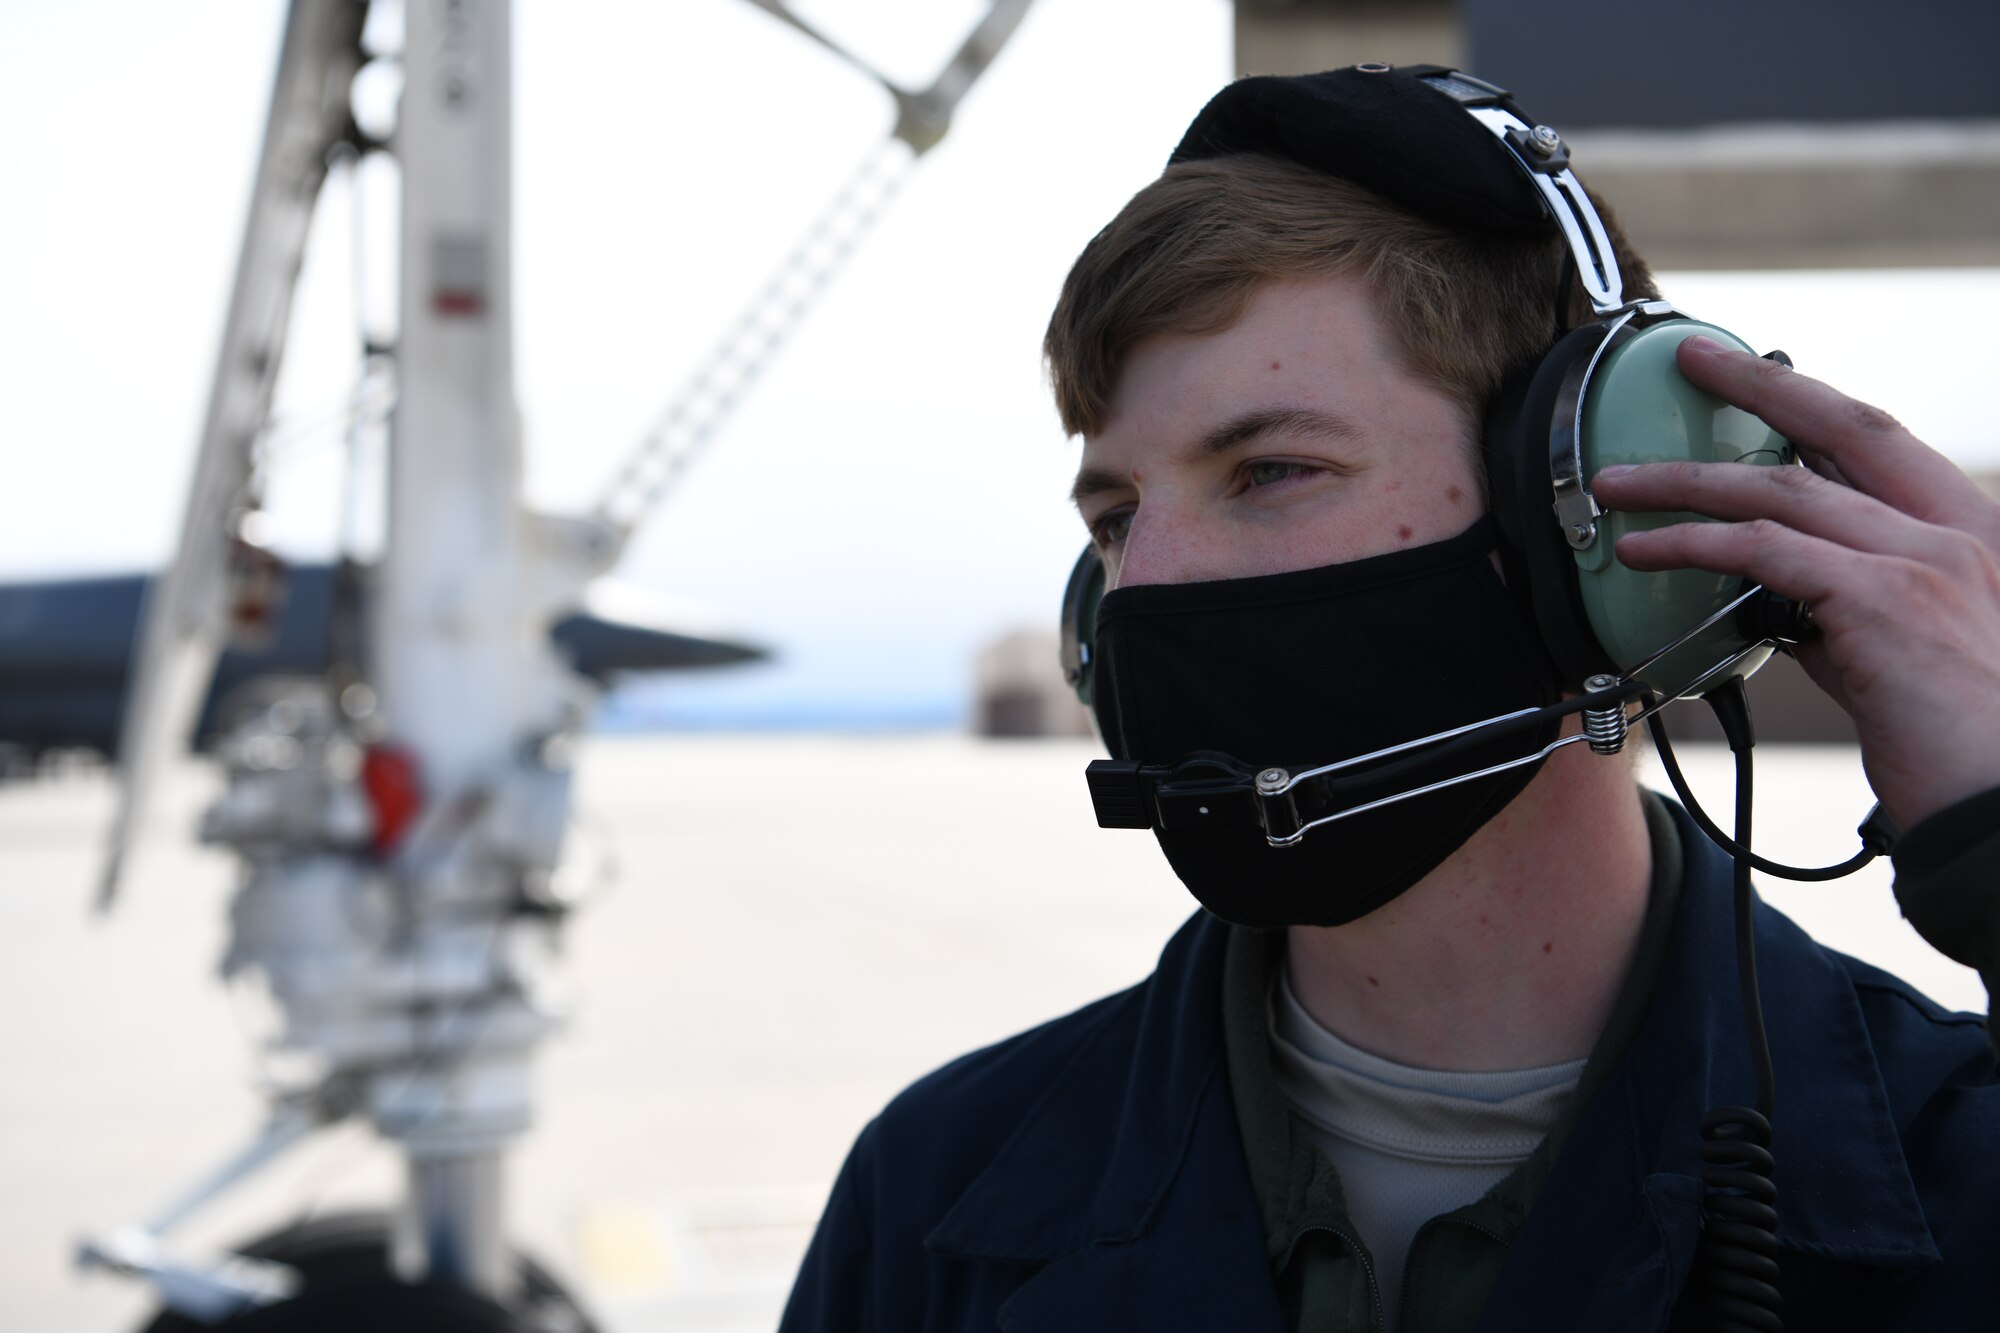 A 28th Aircraft Maintenance Squadron crew chief talks to 34th Bomb Squadron aviators in the cockpit of a B-1B Lancer prior to a non-stop deployment from Ellsworth Air Force Base, S.D., May 4, 2020. These bomber missions are representative of the U.S. commitment to integrating with NATO and allied partners, and ensuring regional security. (U.S. Air Force photo by Senior Airman Nicolas Z. Erwin)